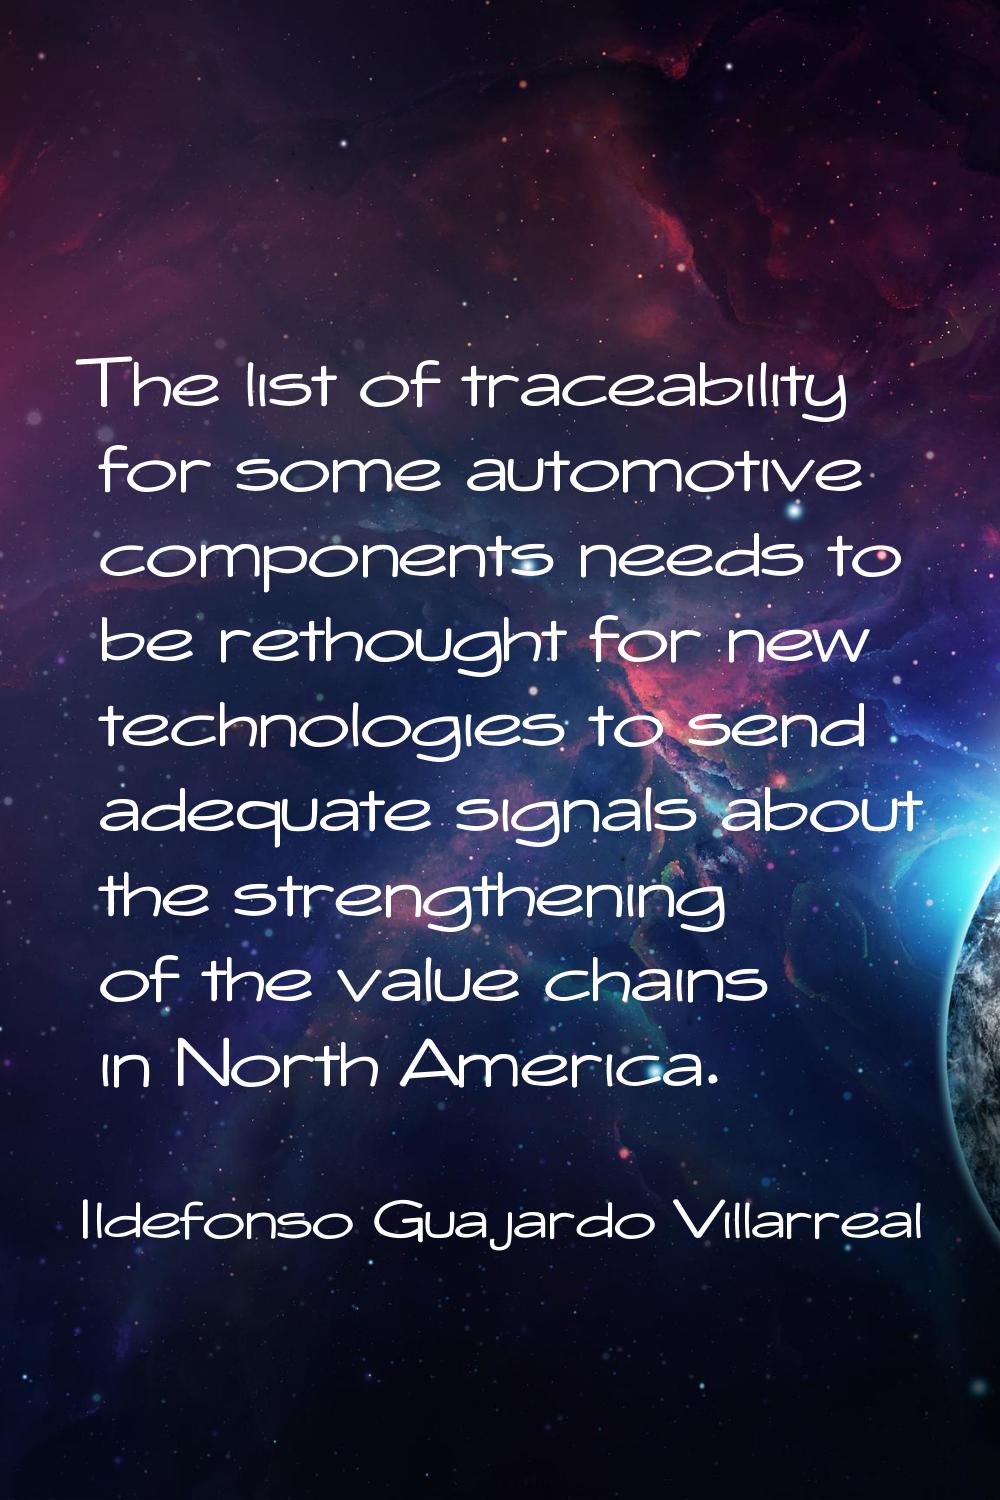 The list of traceability for some automotive components needs to be rethought for new technologies 